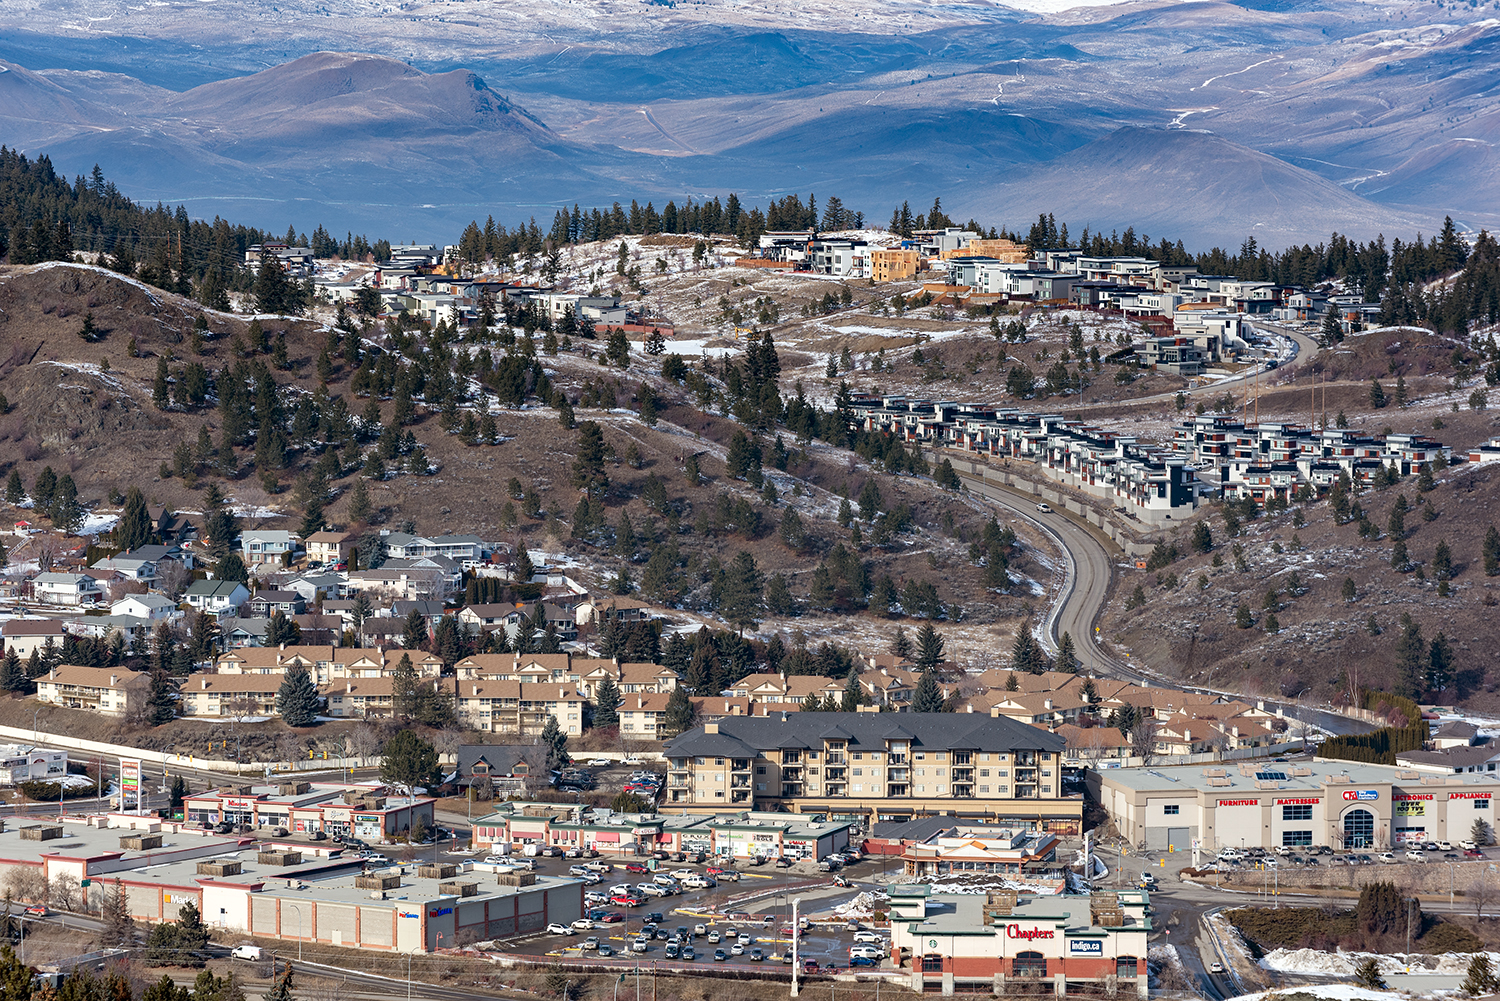 Kamloops City with colorful rooftops and mountains with trees